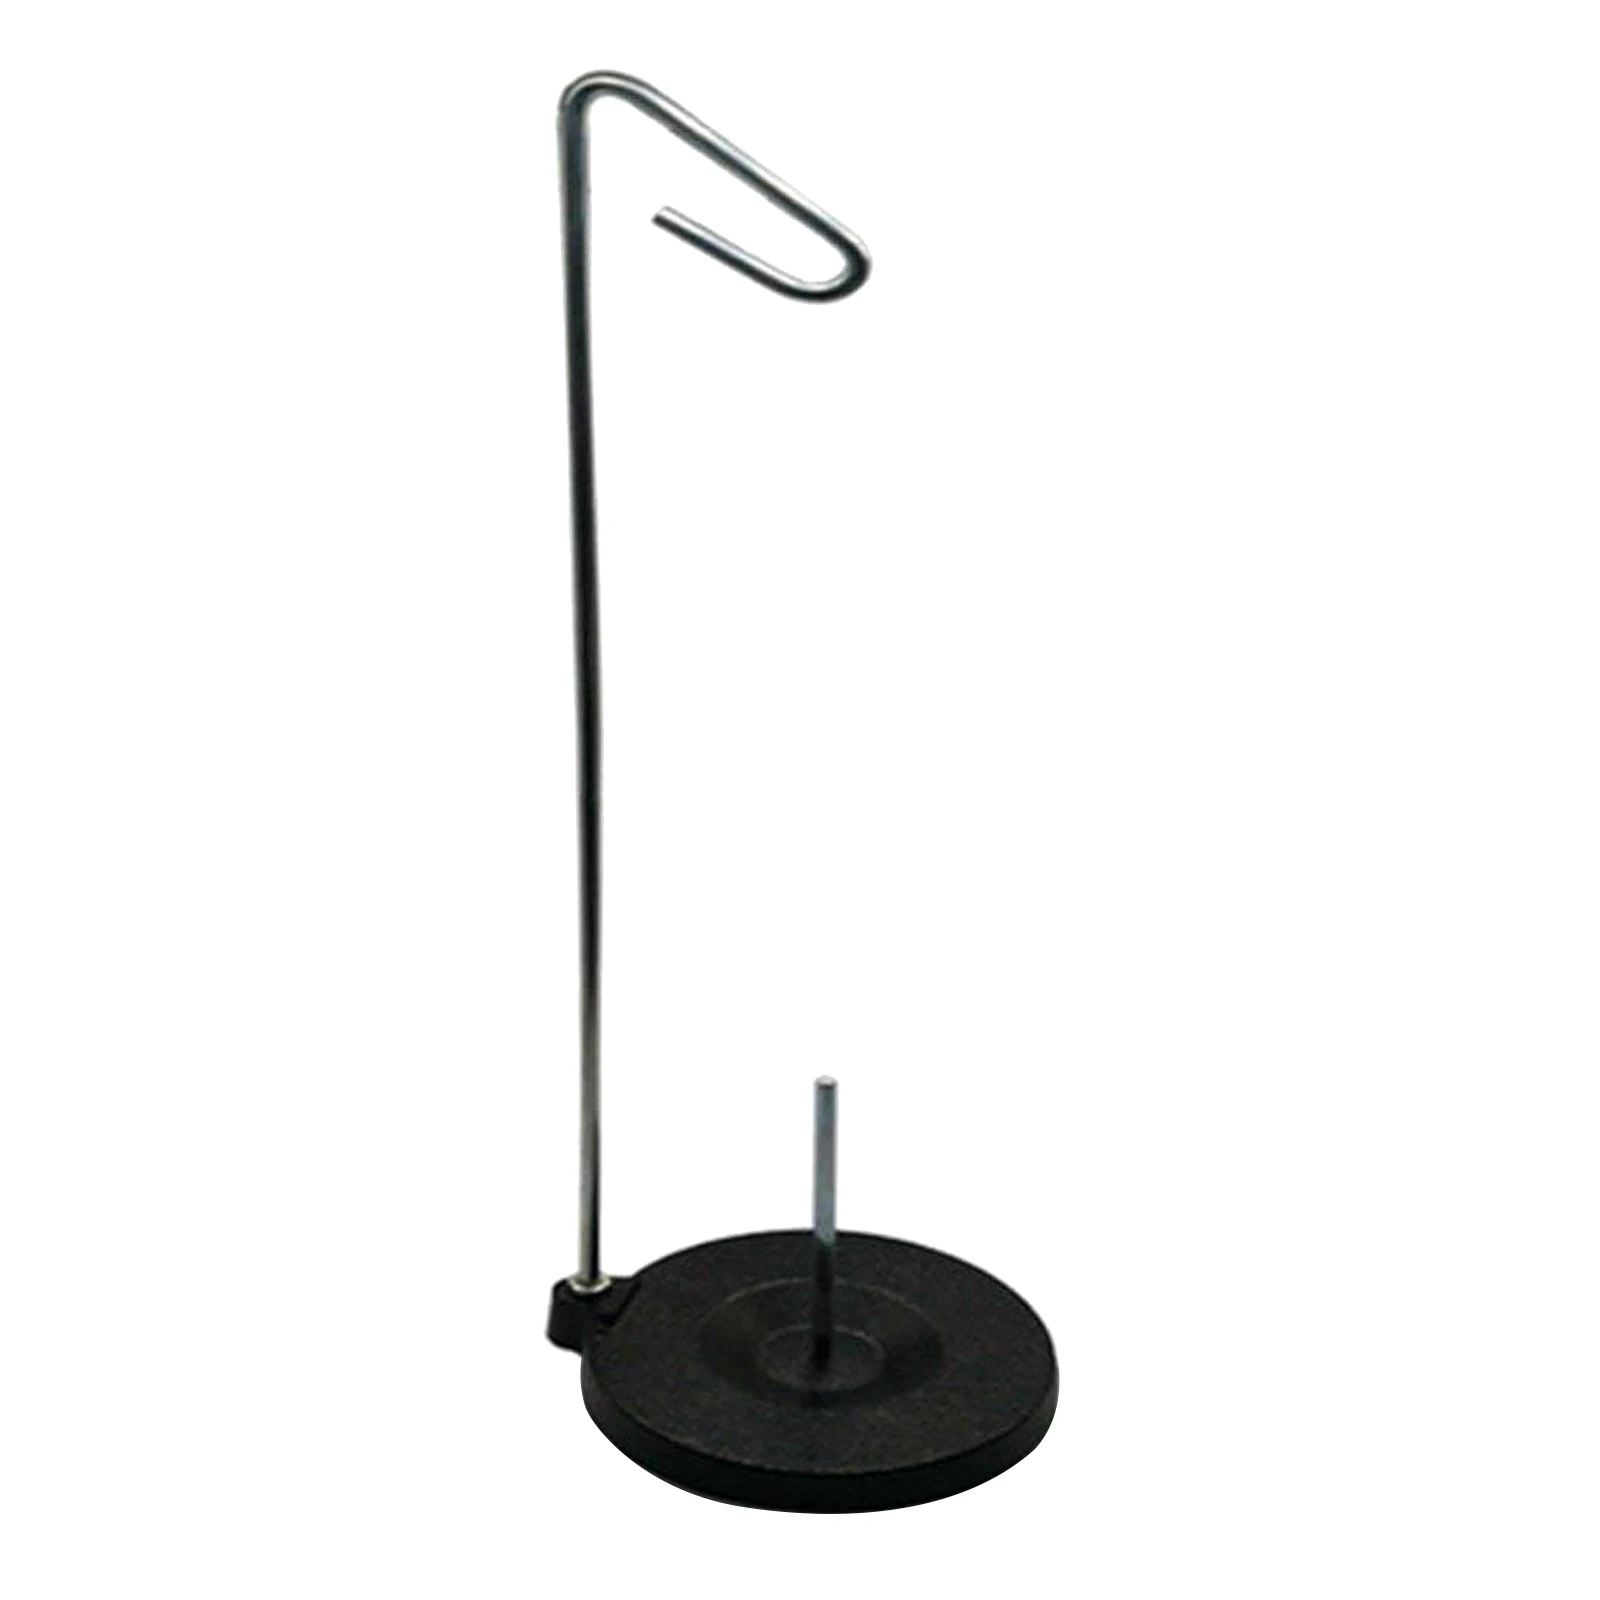 Single Cone Spool Stand Alone Cast Iron Thread Stand Thread Holder Fits for Sewing Embroidery Serger Brand 